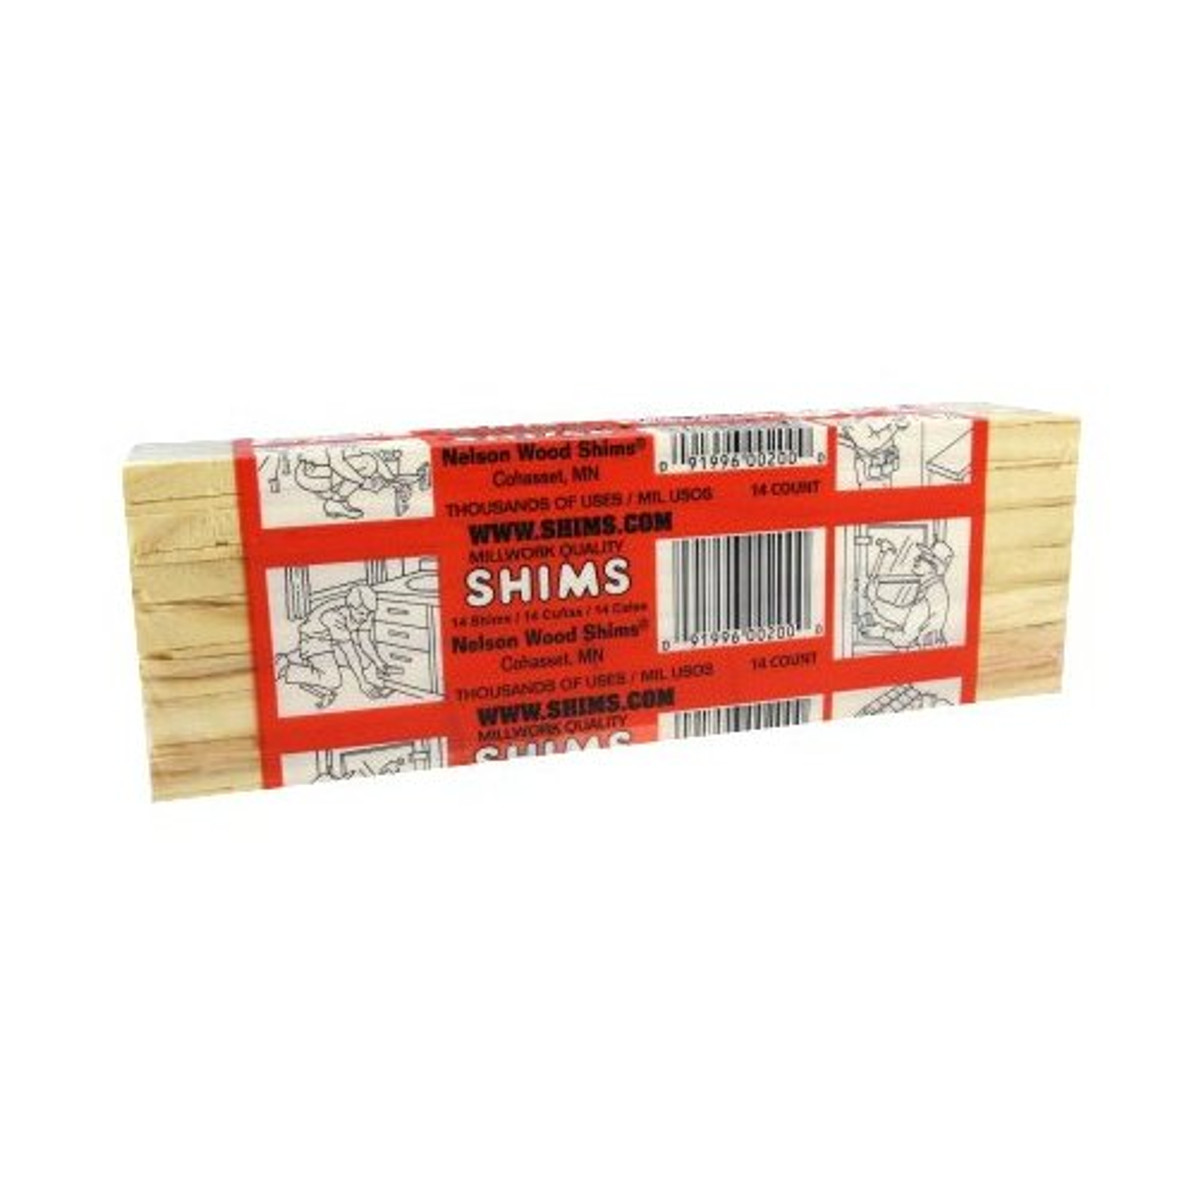 Nelson Wood Shims 12 in. Wood Shim